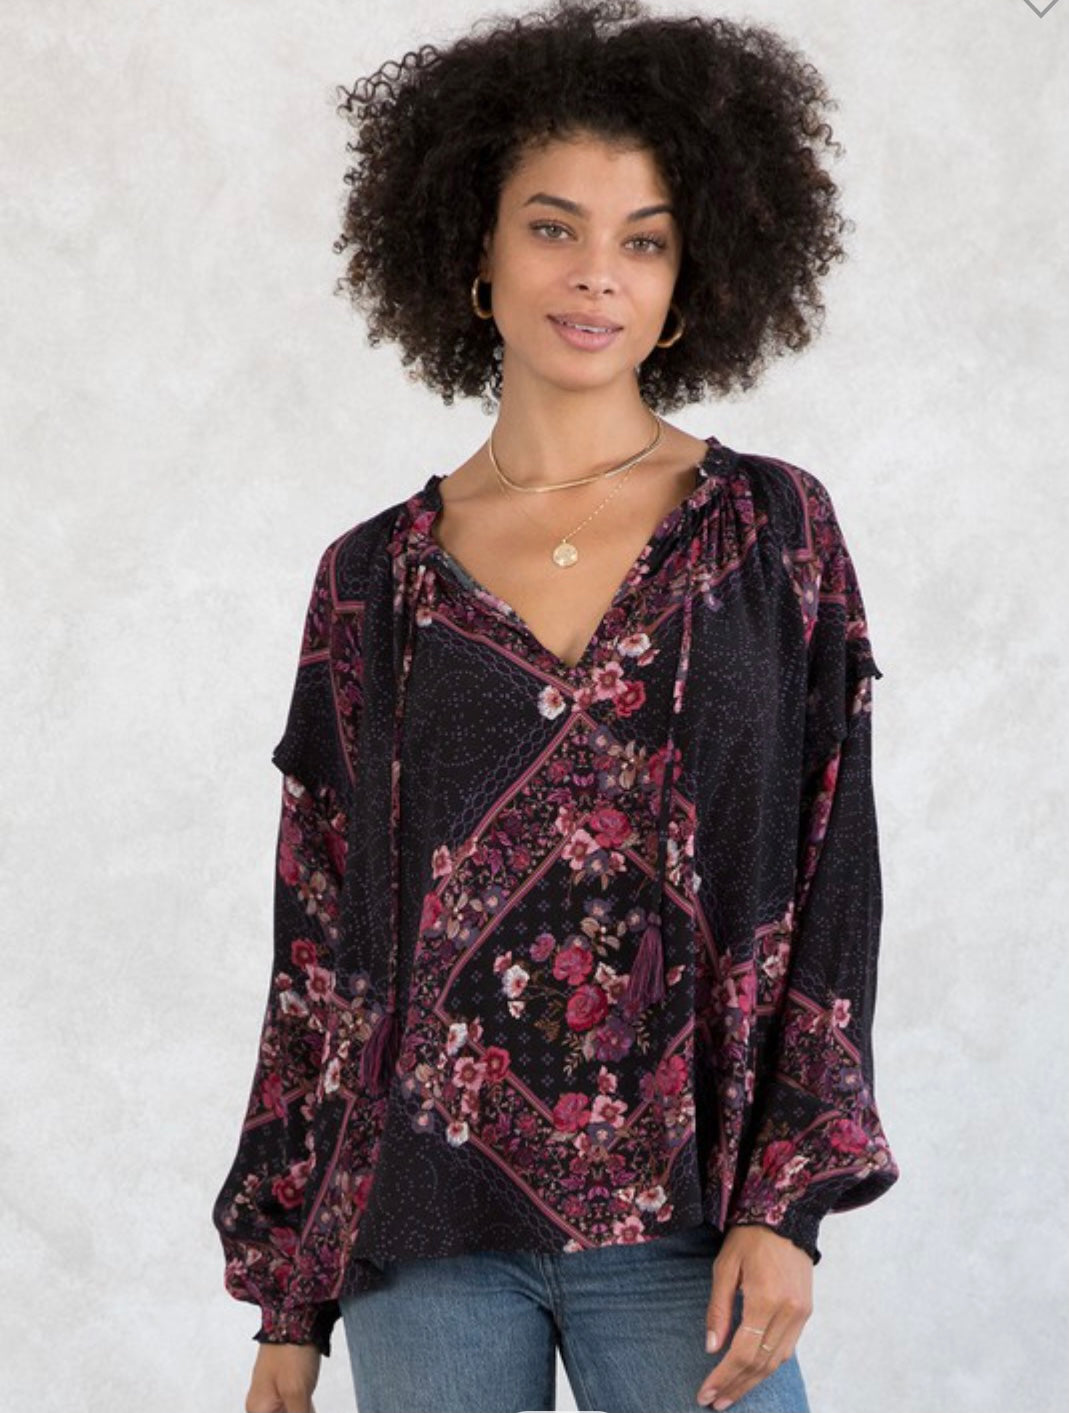 Plum/Berry floral Top